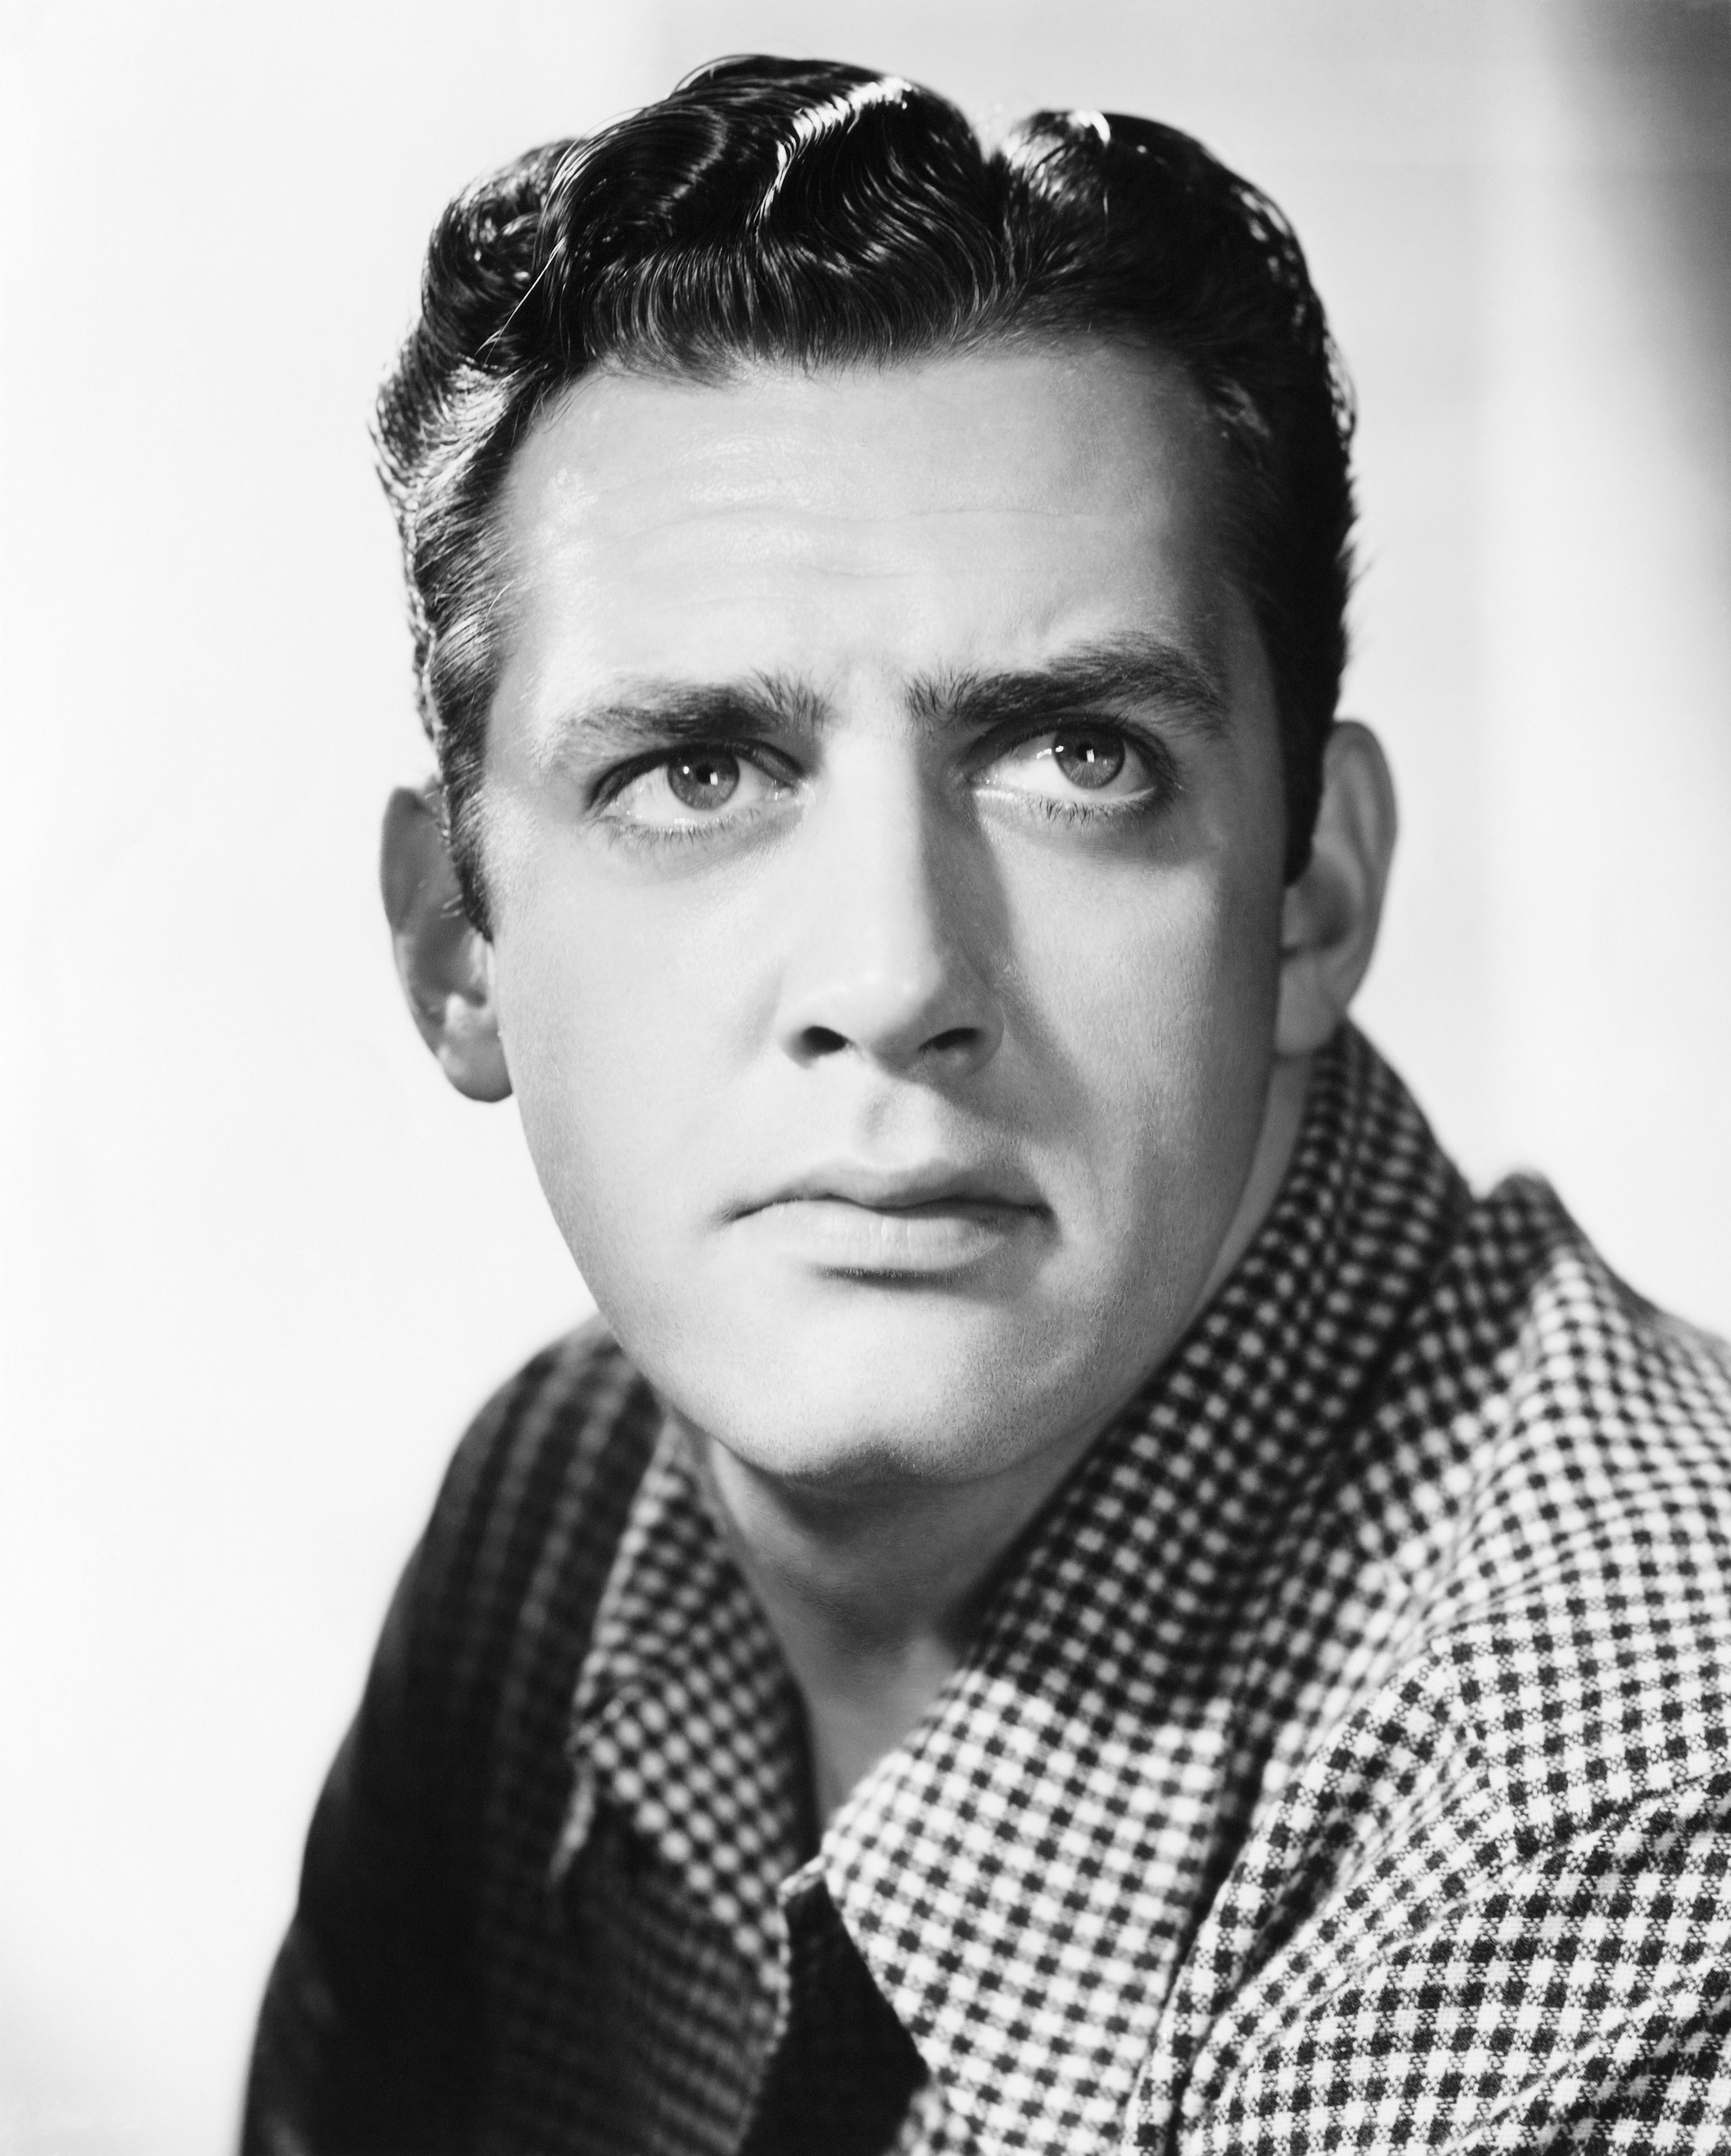 A headshot of television icon Raymond Burr wearing a checkered shirt. | Source: Getty Images